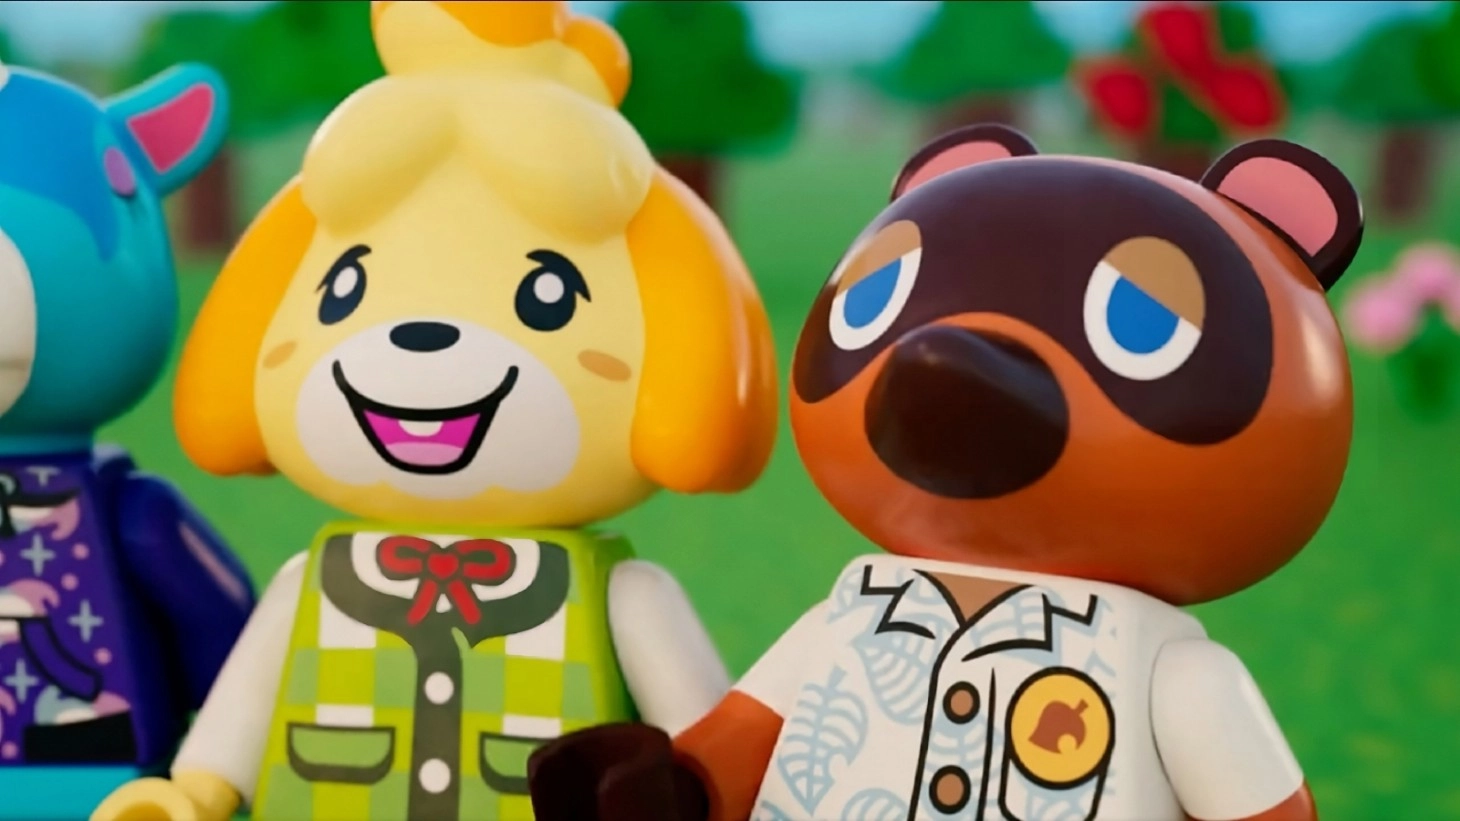 Animal Crossing Forms Unlikely Alliance with LEGO